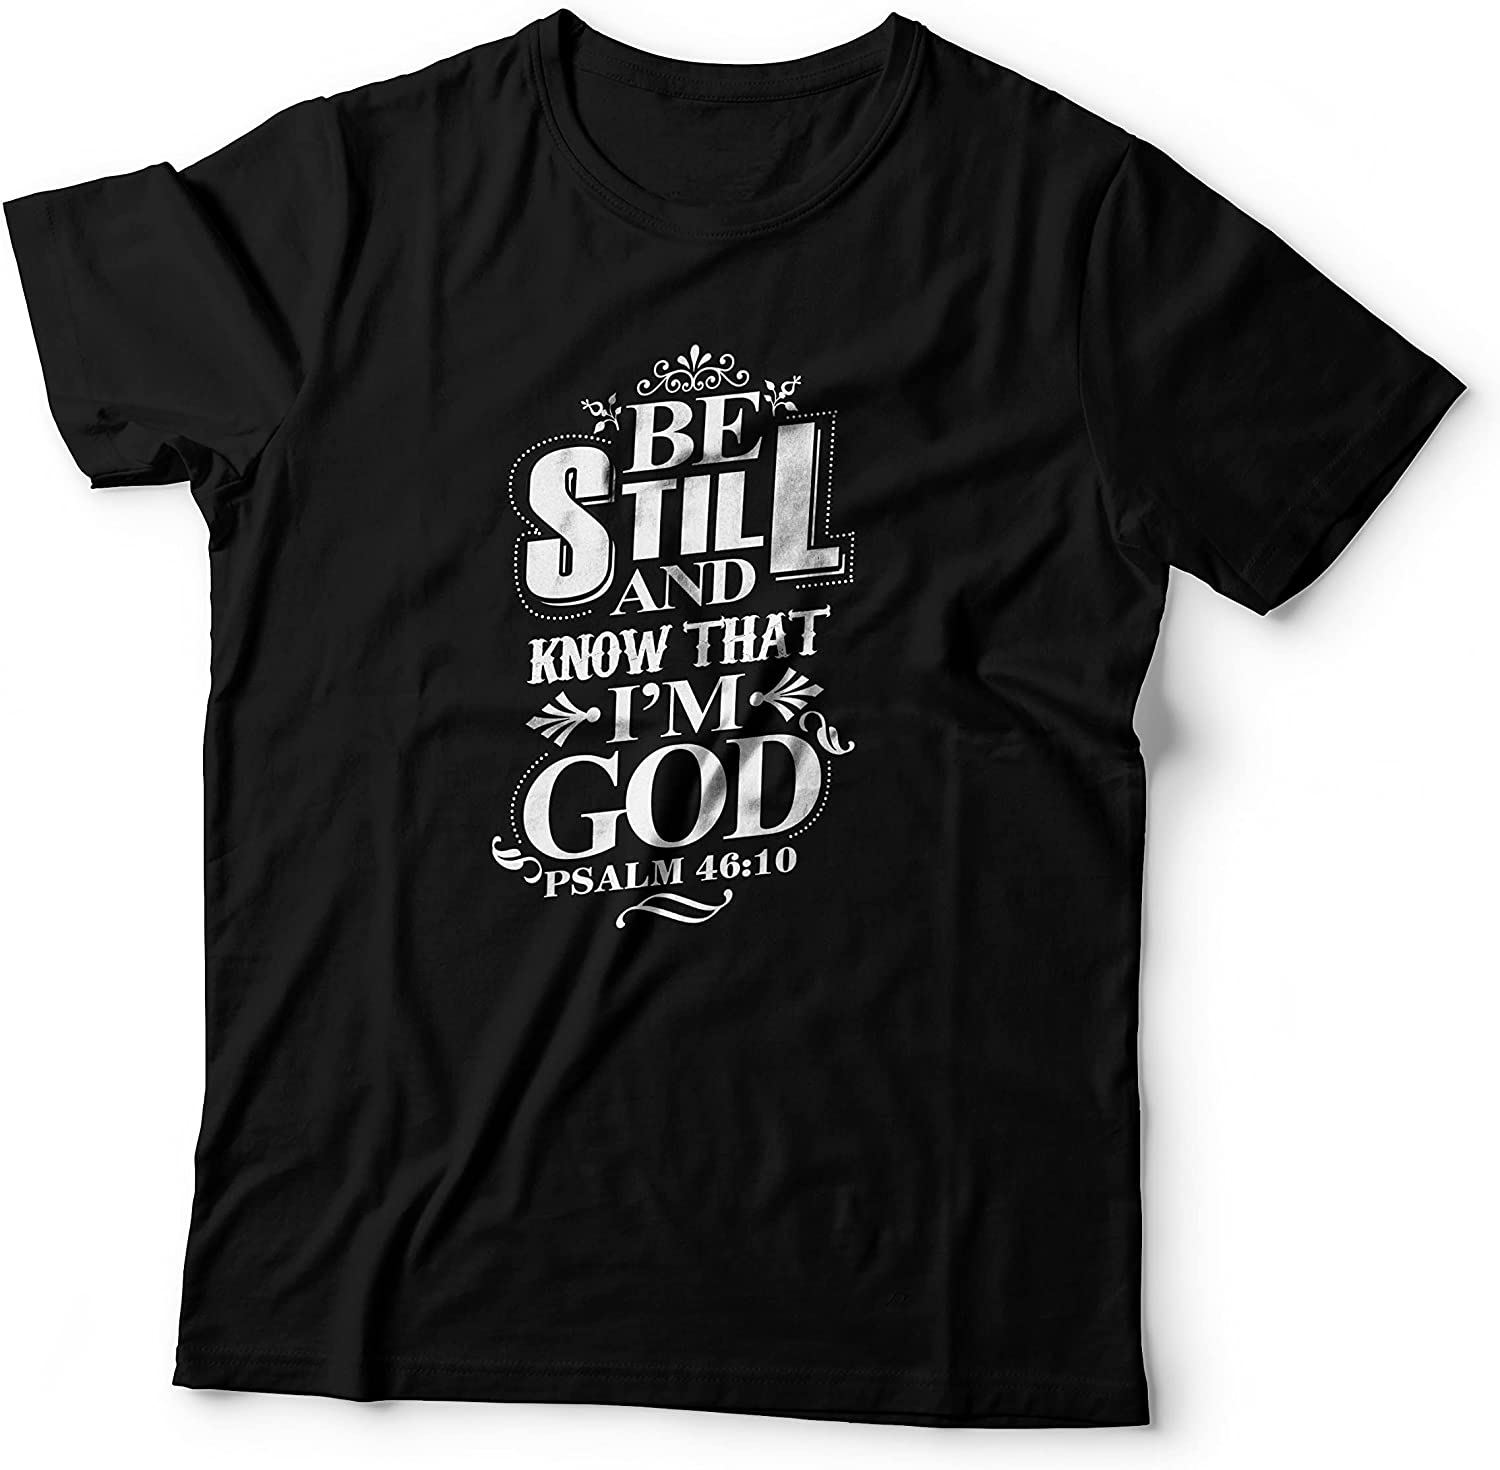 Be Still and Know That I am God Psalm 46-10 T-Shirt Black-Large